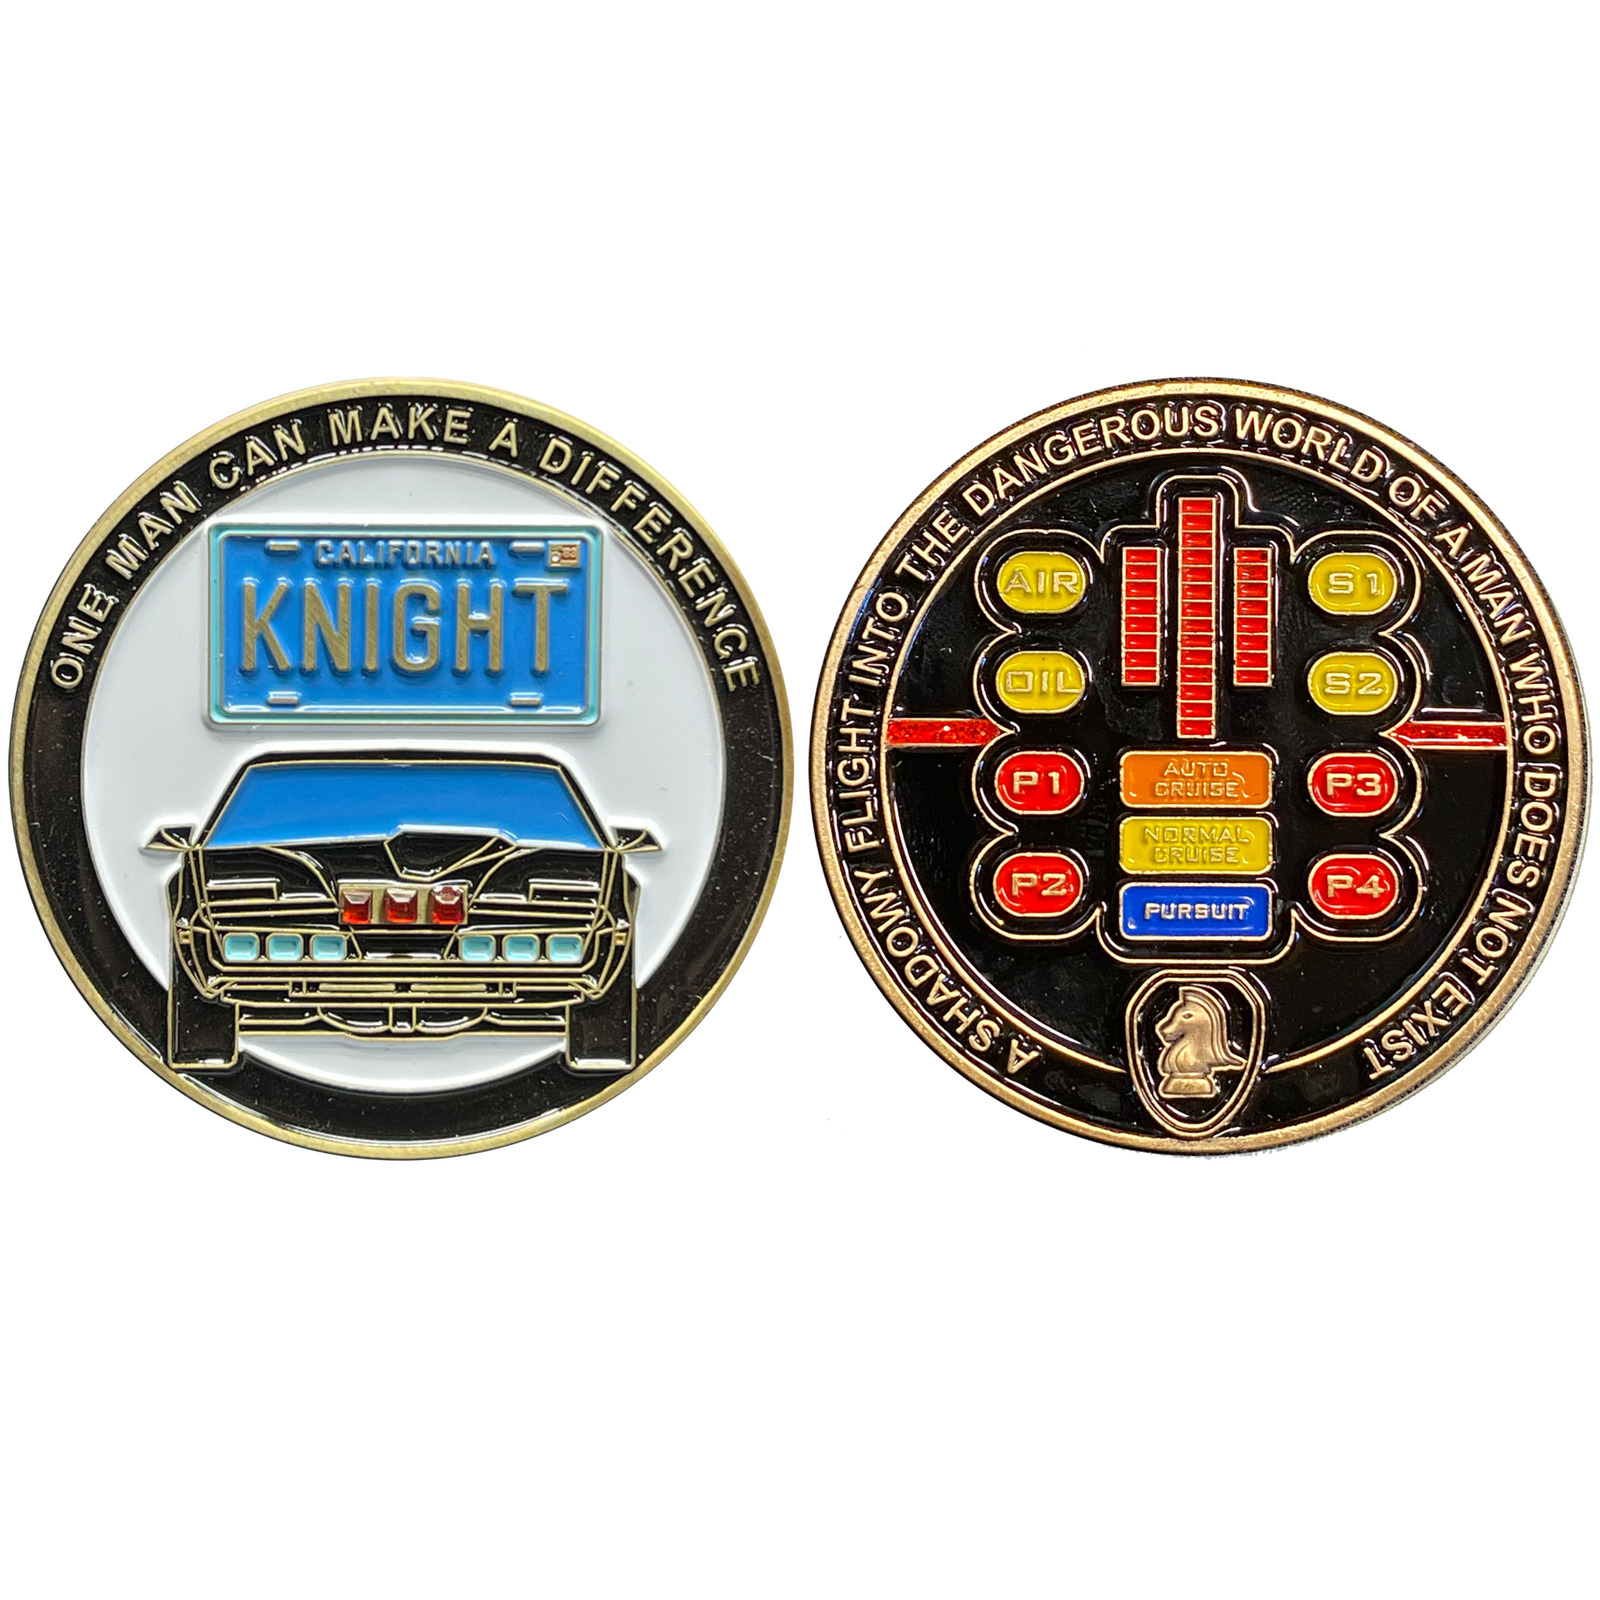 KNIGHT RIDER KITT white variant Challenge Coin Limited Edition of 87 BL8-003